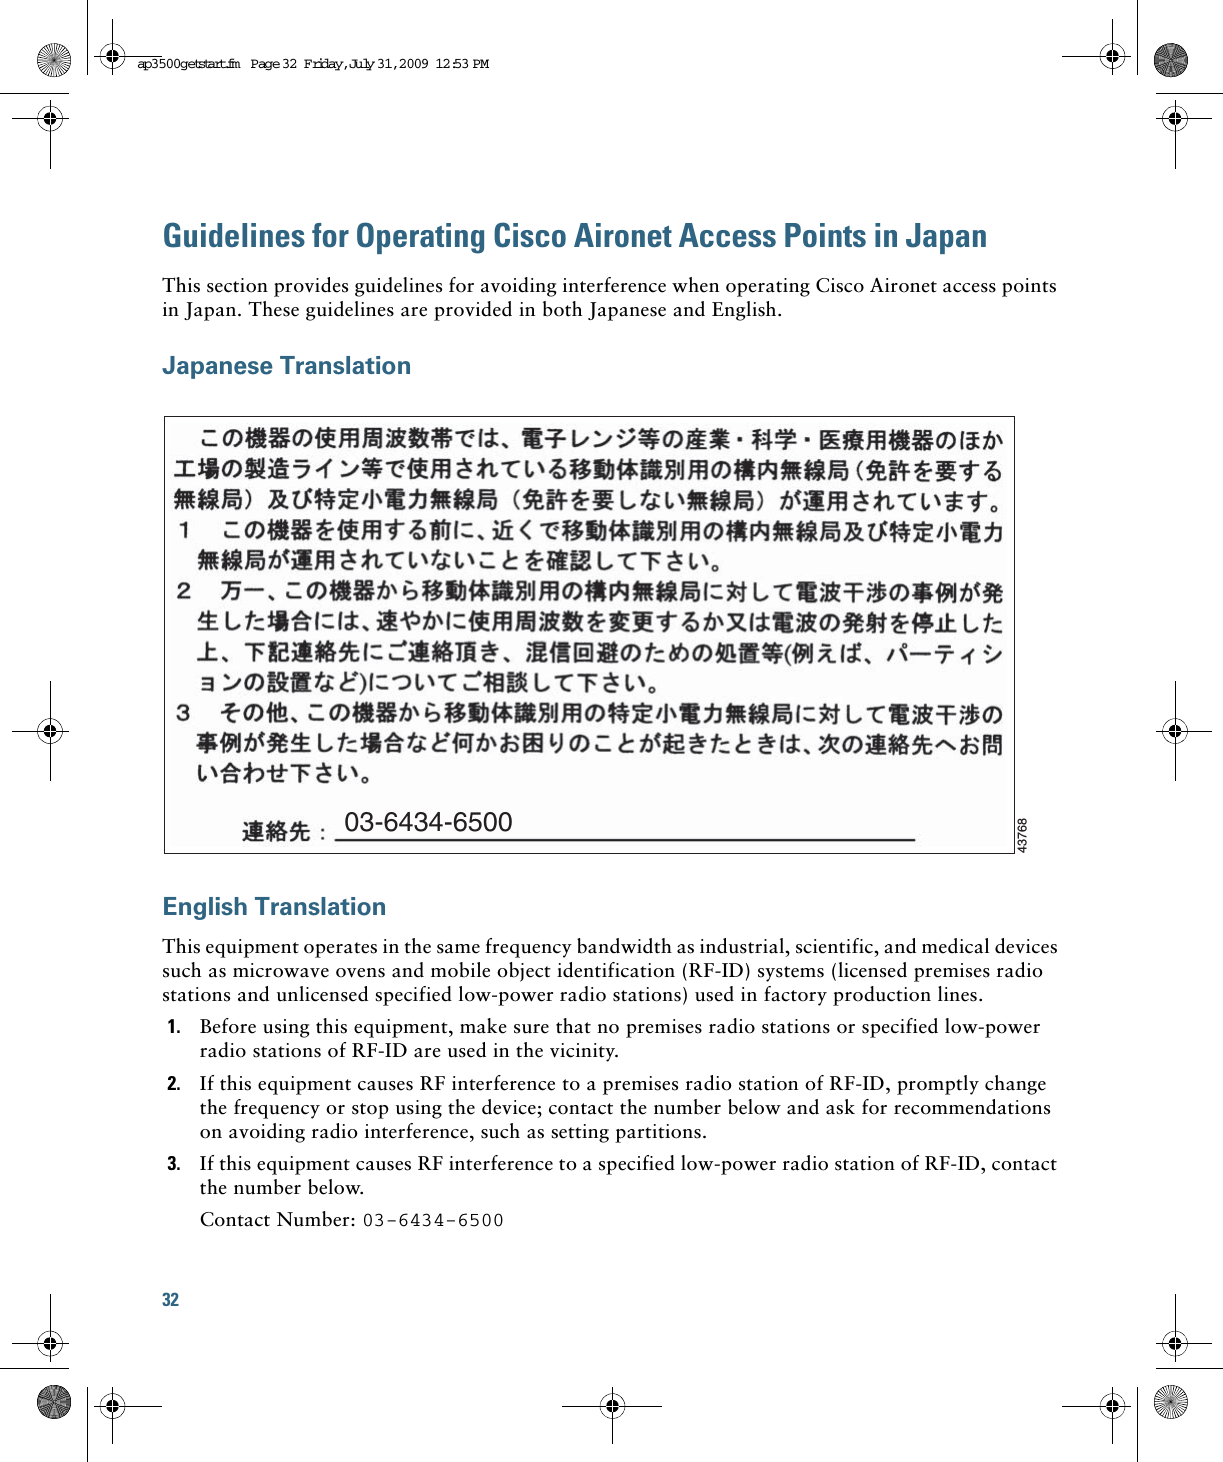 32 Guidelines for Operating Cisco Aironet Access Points in JapanThis section provides guidelines for avoiding interference when operating Cisco Aironet access points in Japan. These guidelines are provided in both Japanese and English.Japanese TranslationEnglish TranslationThis equipment operates in the same frequency bandwidth as industrial, scientific, and medical devices such as microwave ovens and mobile object identification (RF-ID) systems (licensed premises radio stations and unlicensed specified low-power radio stations) used in factory production lines.1. Before using this equipment, make sure that no premises radio stations or specified low-power radio stations of RF-ID are used in the vicinity.2. If this equipment causes RF interference to a premises radio station of RF-ID, promptly change the frequency or stop using the device; contact the number below and ask for recommendations on avoiding radio interference, such as setting partitions.3. If this equipment causes RF interference to a specified low-power radio station of RF-ID, contact the number below.Contact Number: 03-6434-650003-6434-650043768ap3500getstart.fm  Page 32  Friday, Ju ly 31, 2009  12:53 PM